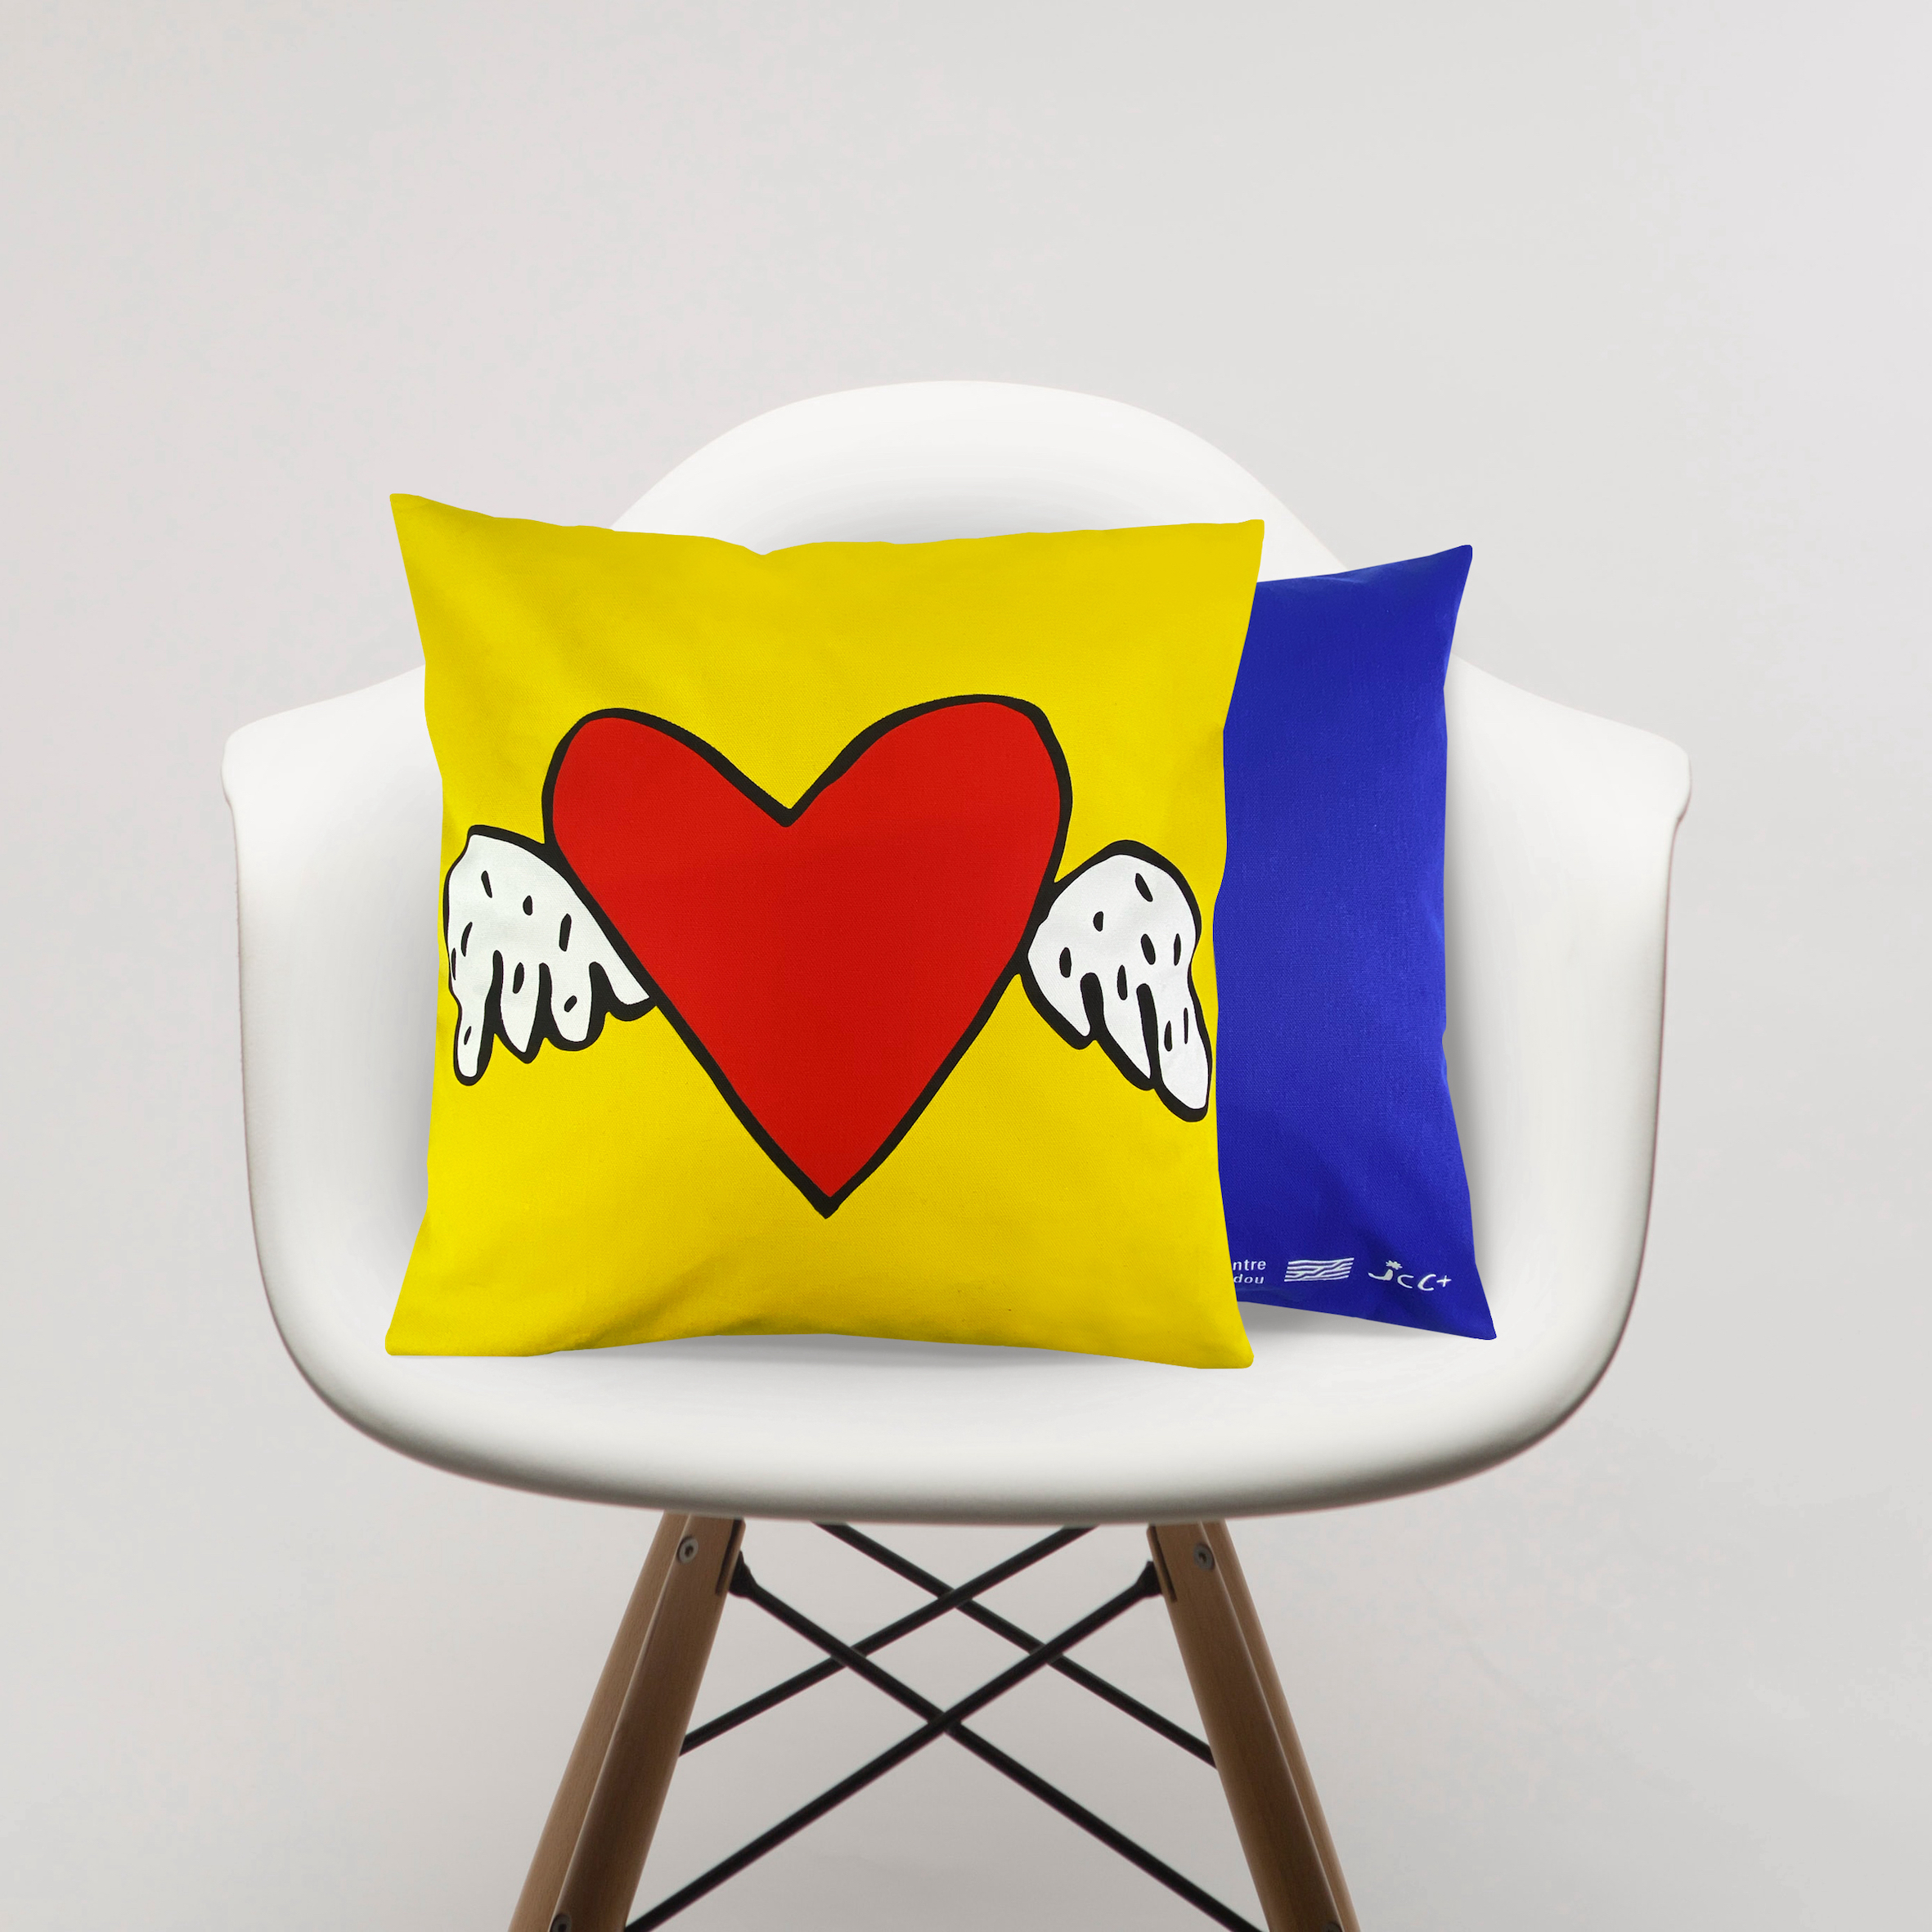 Beautiful cushions for the Pompidou's new Jean-Charles de Castelbajac colelction made by Paul Bristow